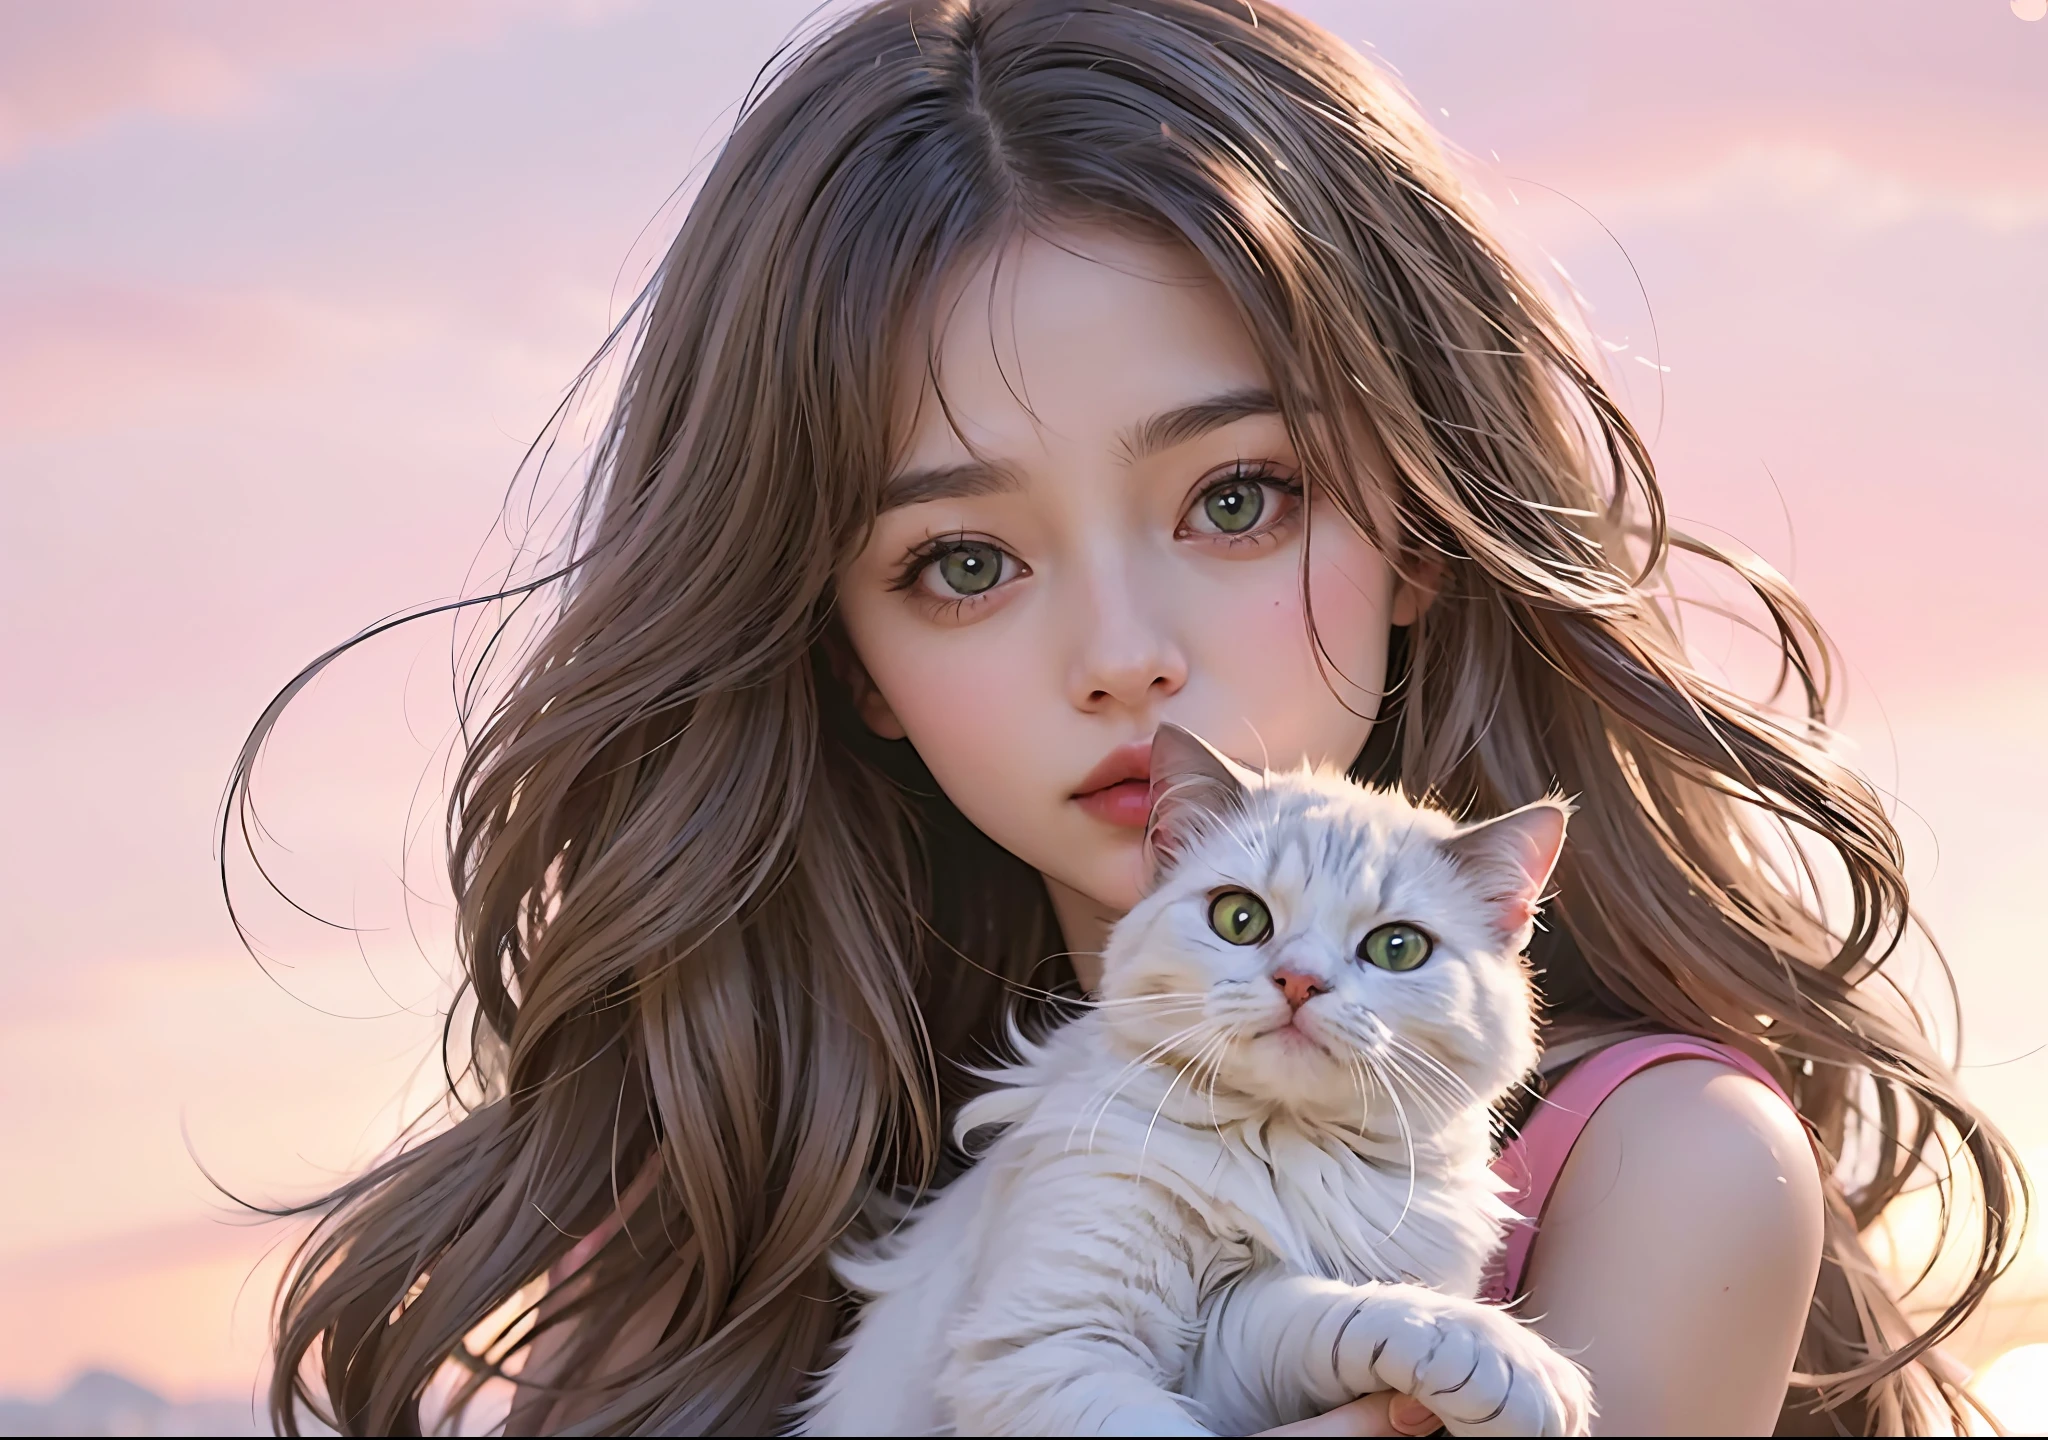 anime Mädchen with long hair holding a Weiß Katze in her arms, very beautiful cute KatzeMädchen, beautiful anime KatzeMädchen, cute anime KatzeMädchen, guweiz, very beautiful anime Katze Mädchen, süßer Kunststil, beautiful young KatzeMädchen, Weiß ( Katze ) Mädchen, attractive Katze Mädchen, artwork in the style of guweiz, Weiß Katze Mädchen, anime KatzeMädchen